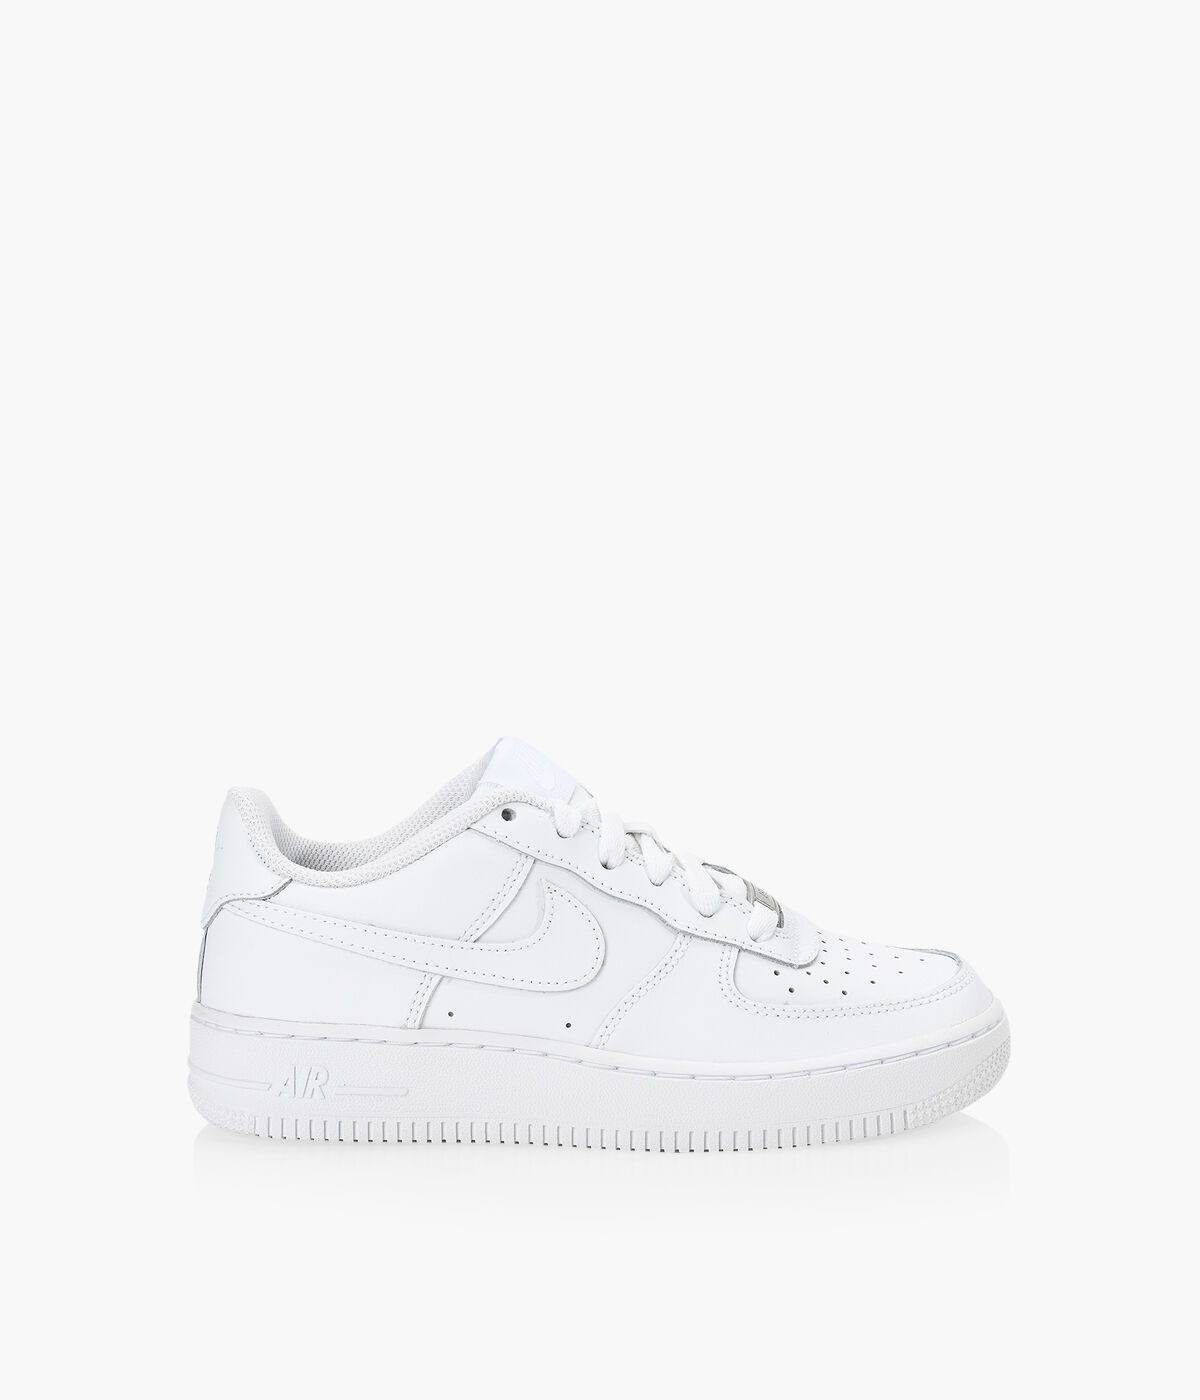 white air forces women's size 6